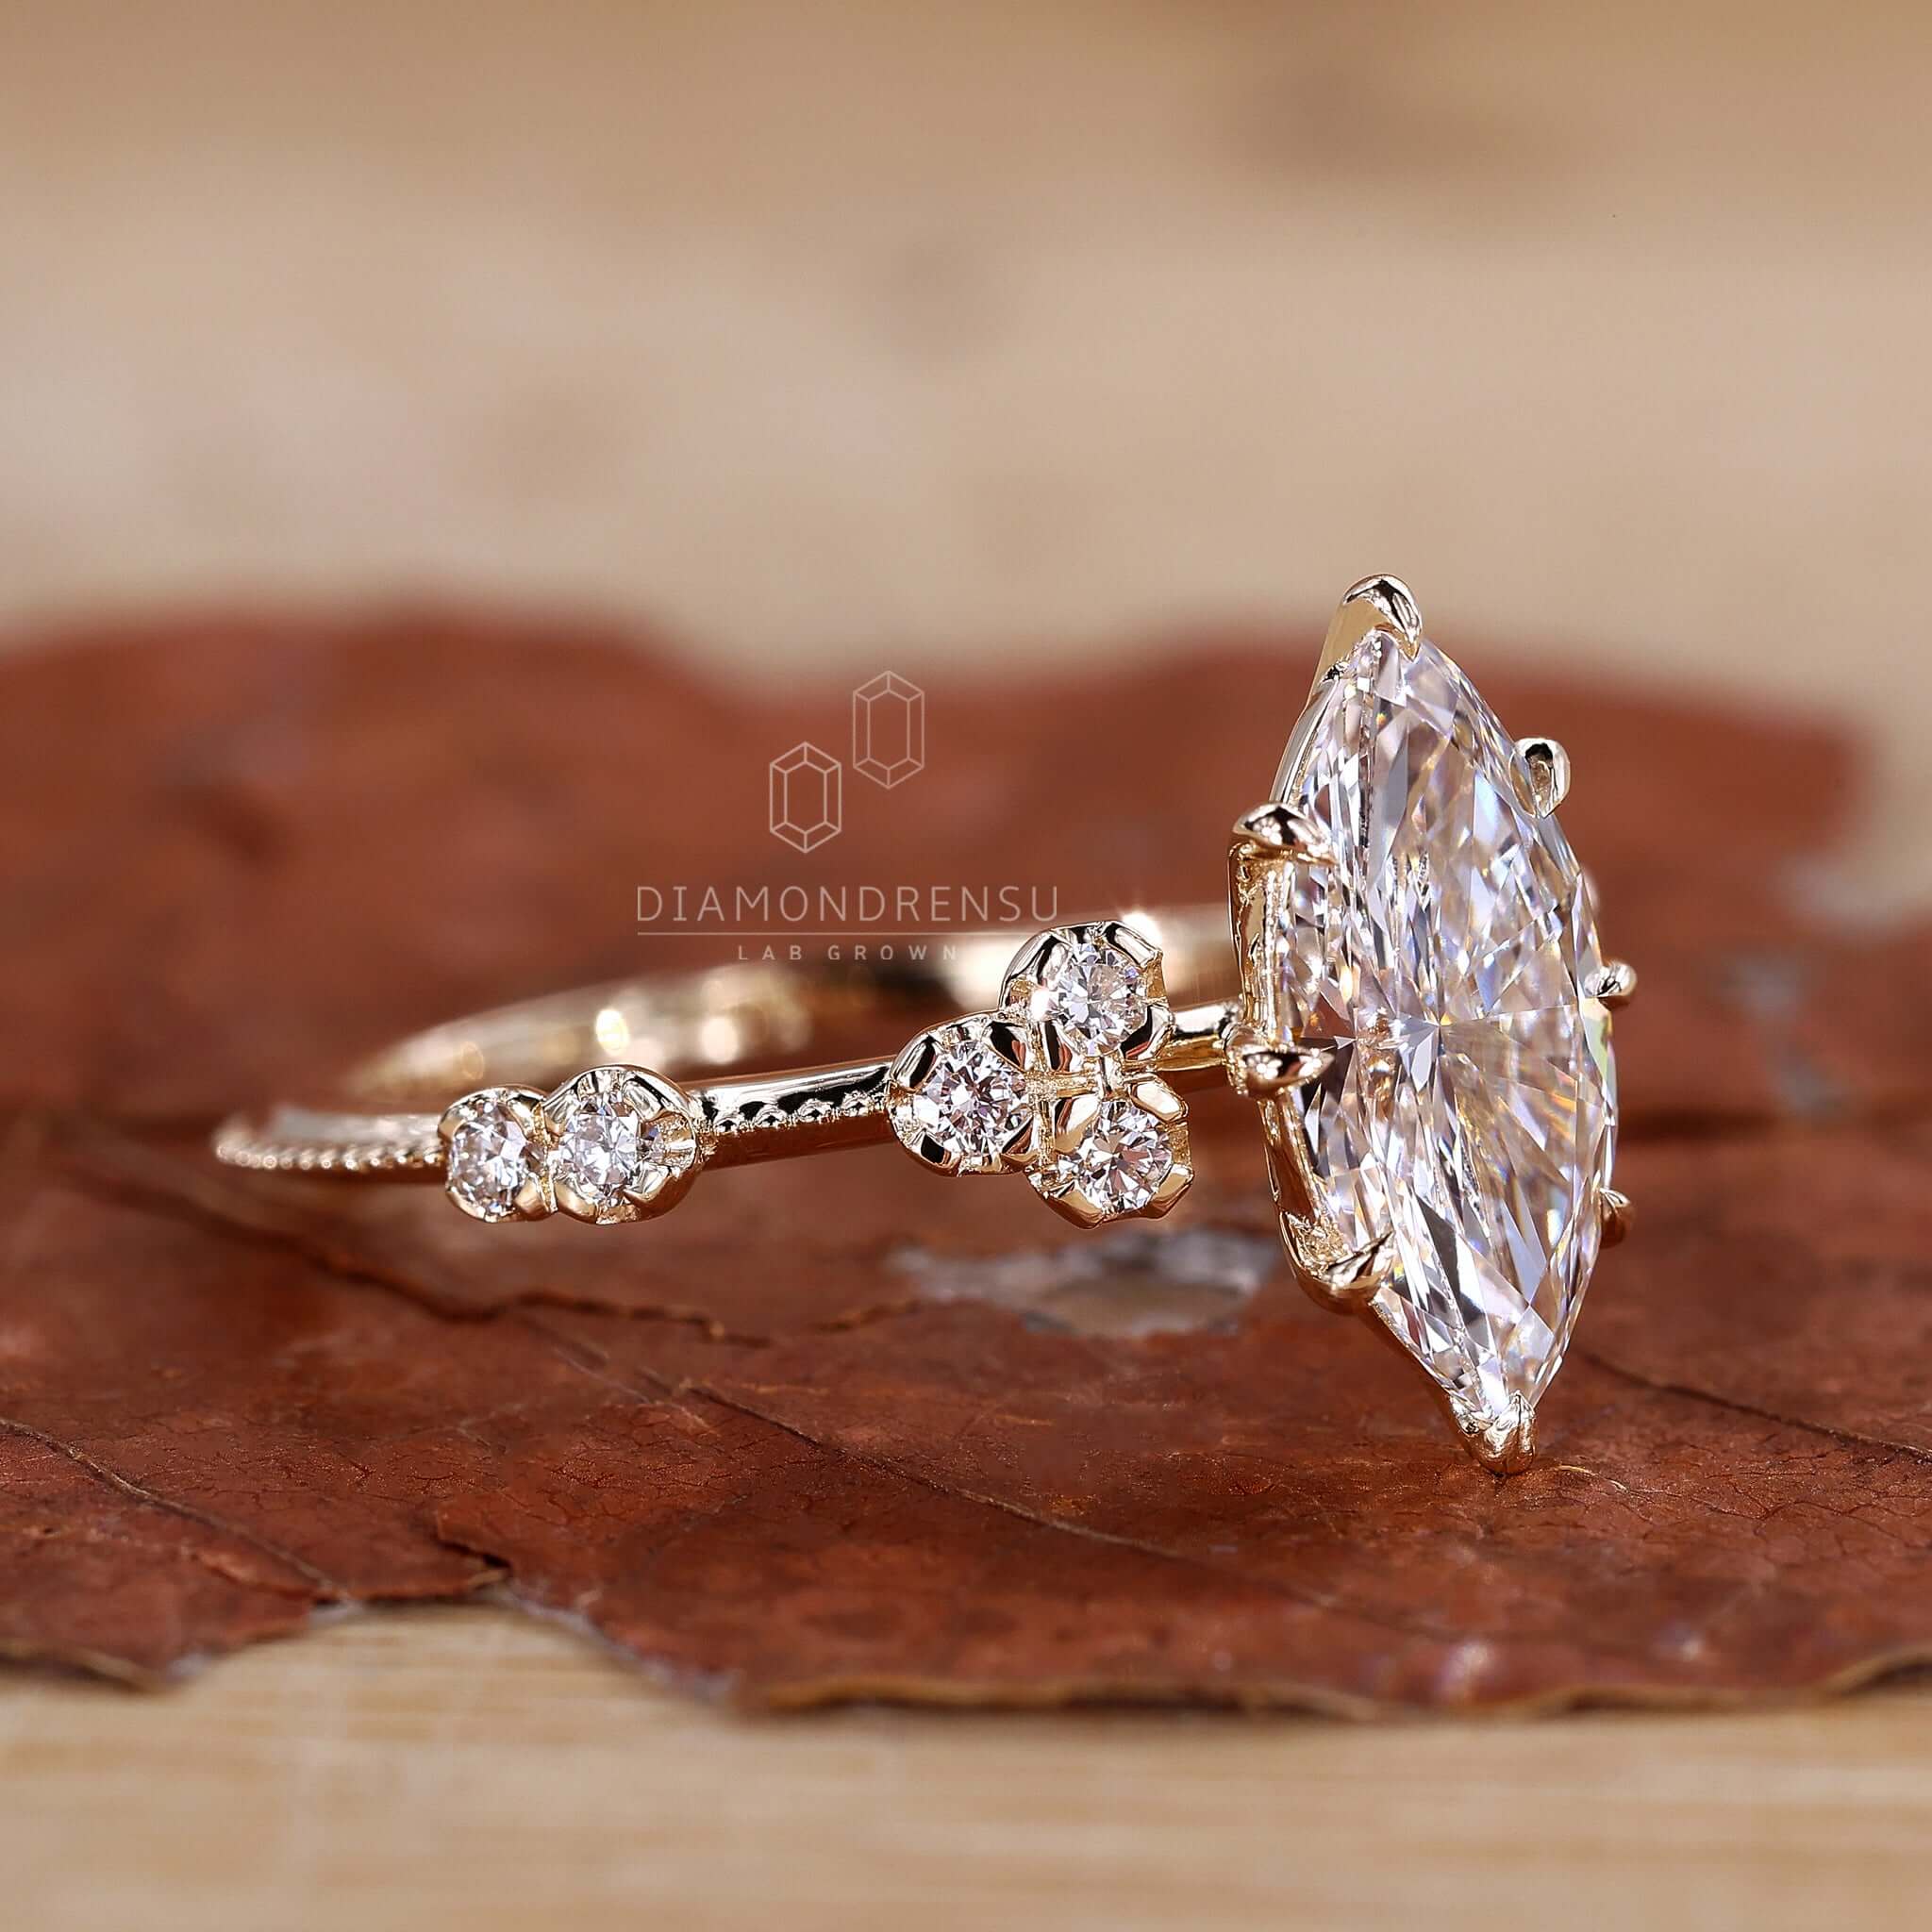 Sophisticated marquise wedding ring, exemplifying the blend of traditional elegance and contemporary flair.